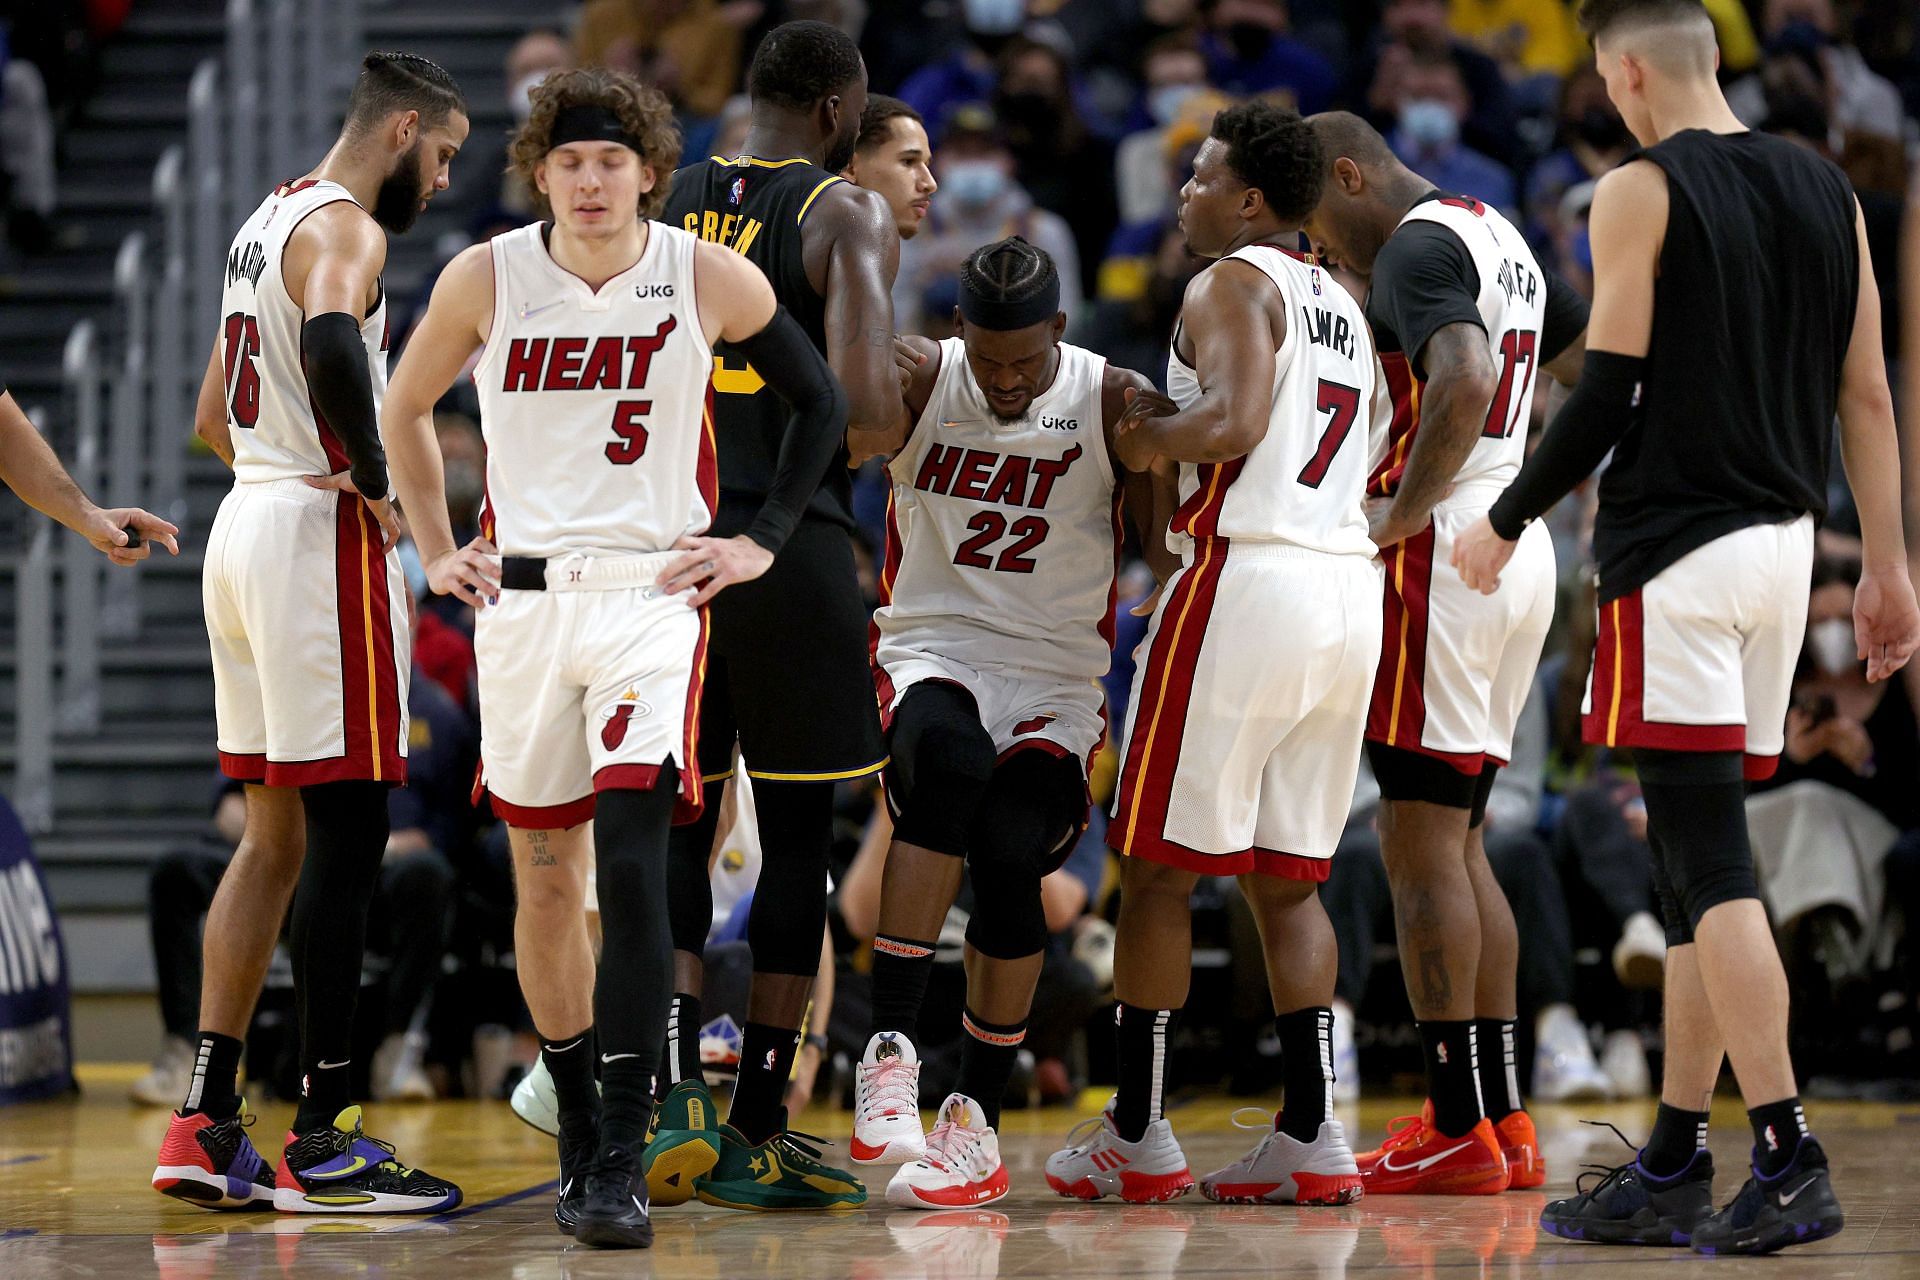 Jimmy Butler of the Miami Heat gets helped up by his teammates after suffering an ankle injury